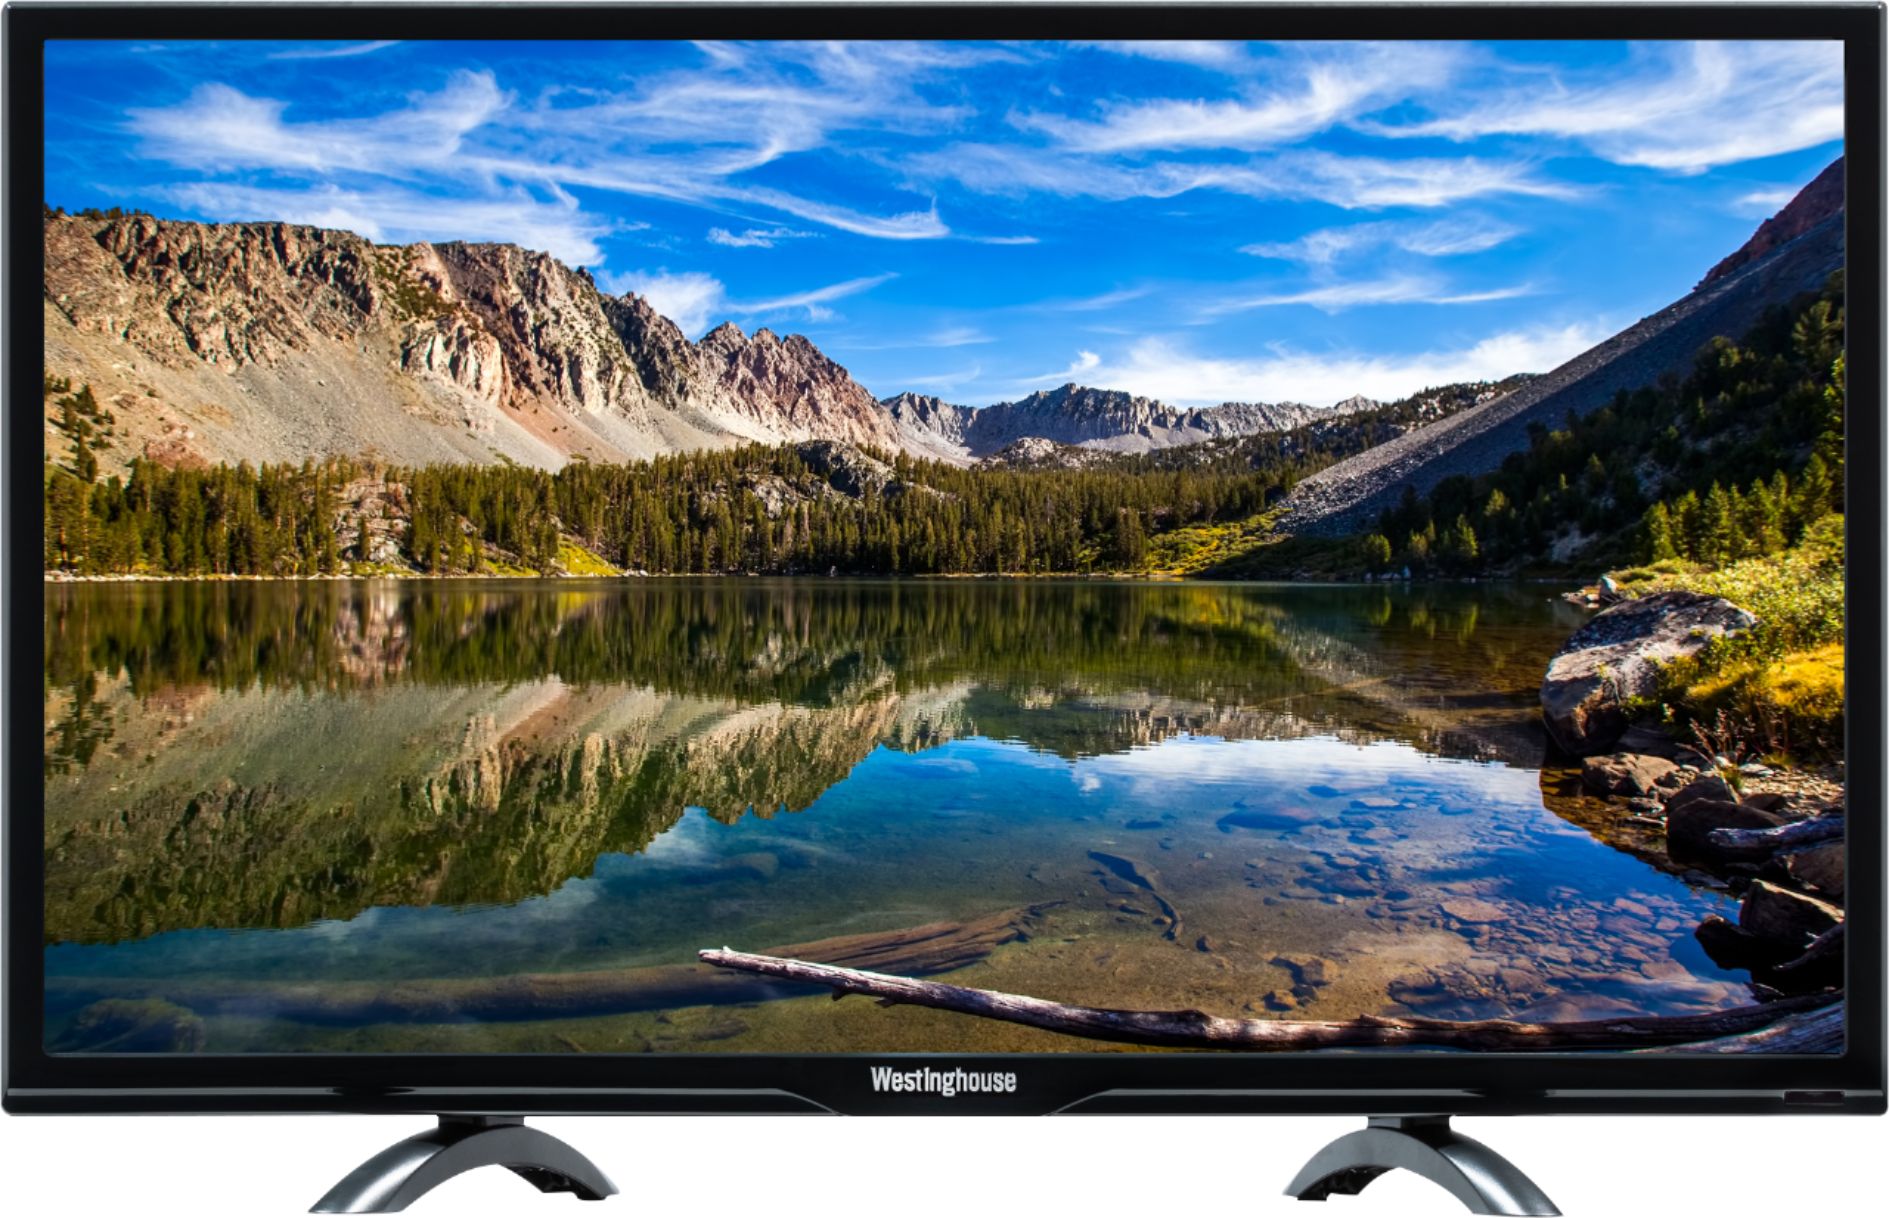 Left View: Westinghouse - 32" Class LED HD TV/DVD Combo